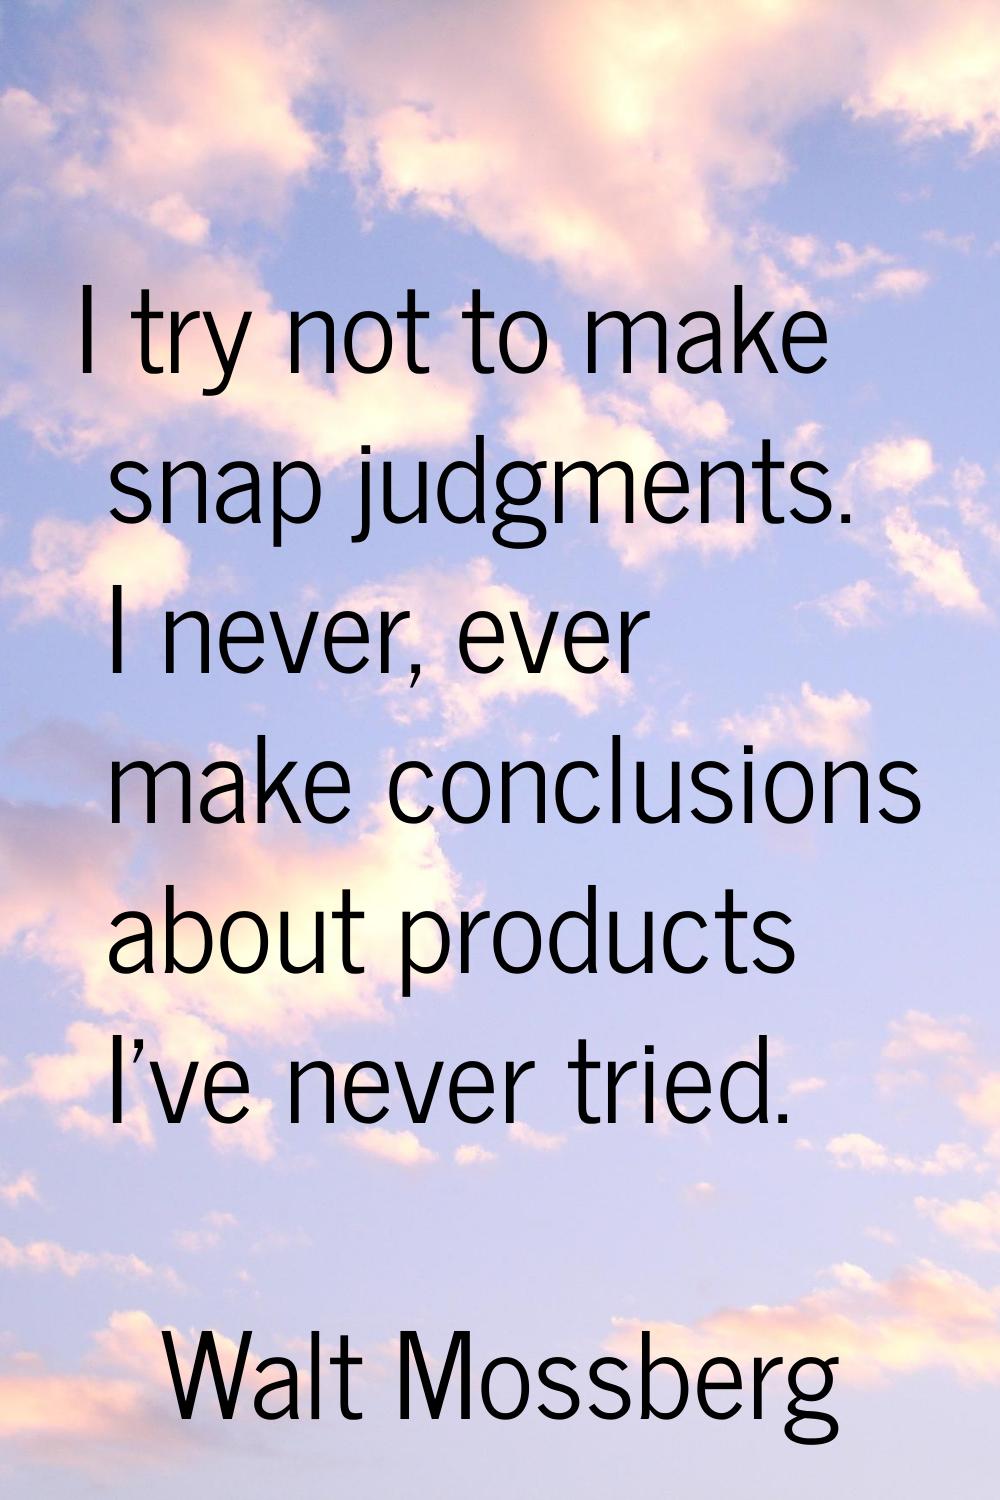 I try not to make snap judgments. I never, ever make conclusions about products I've never tried.